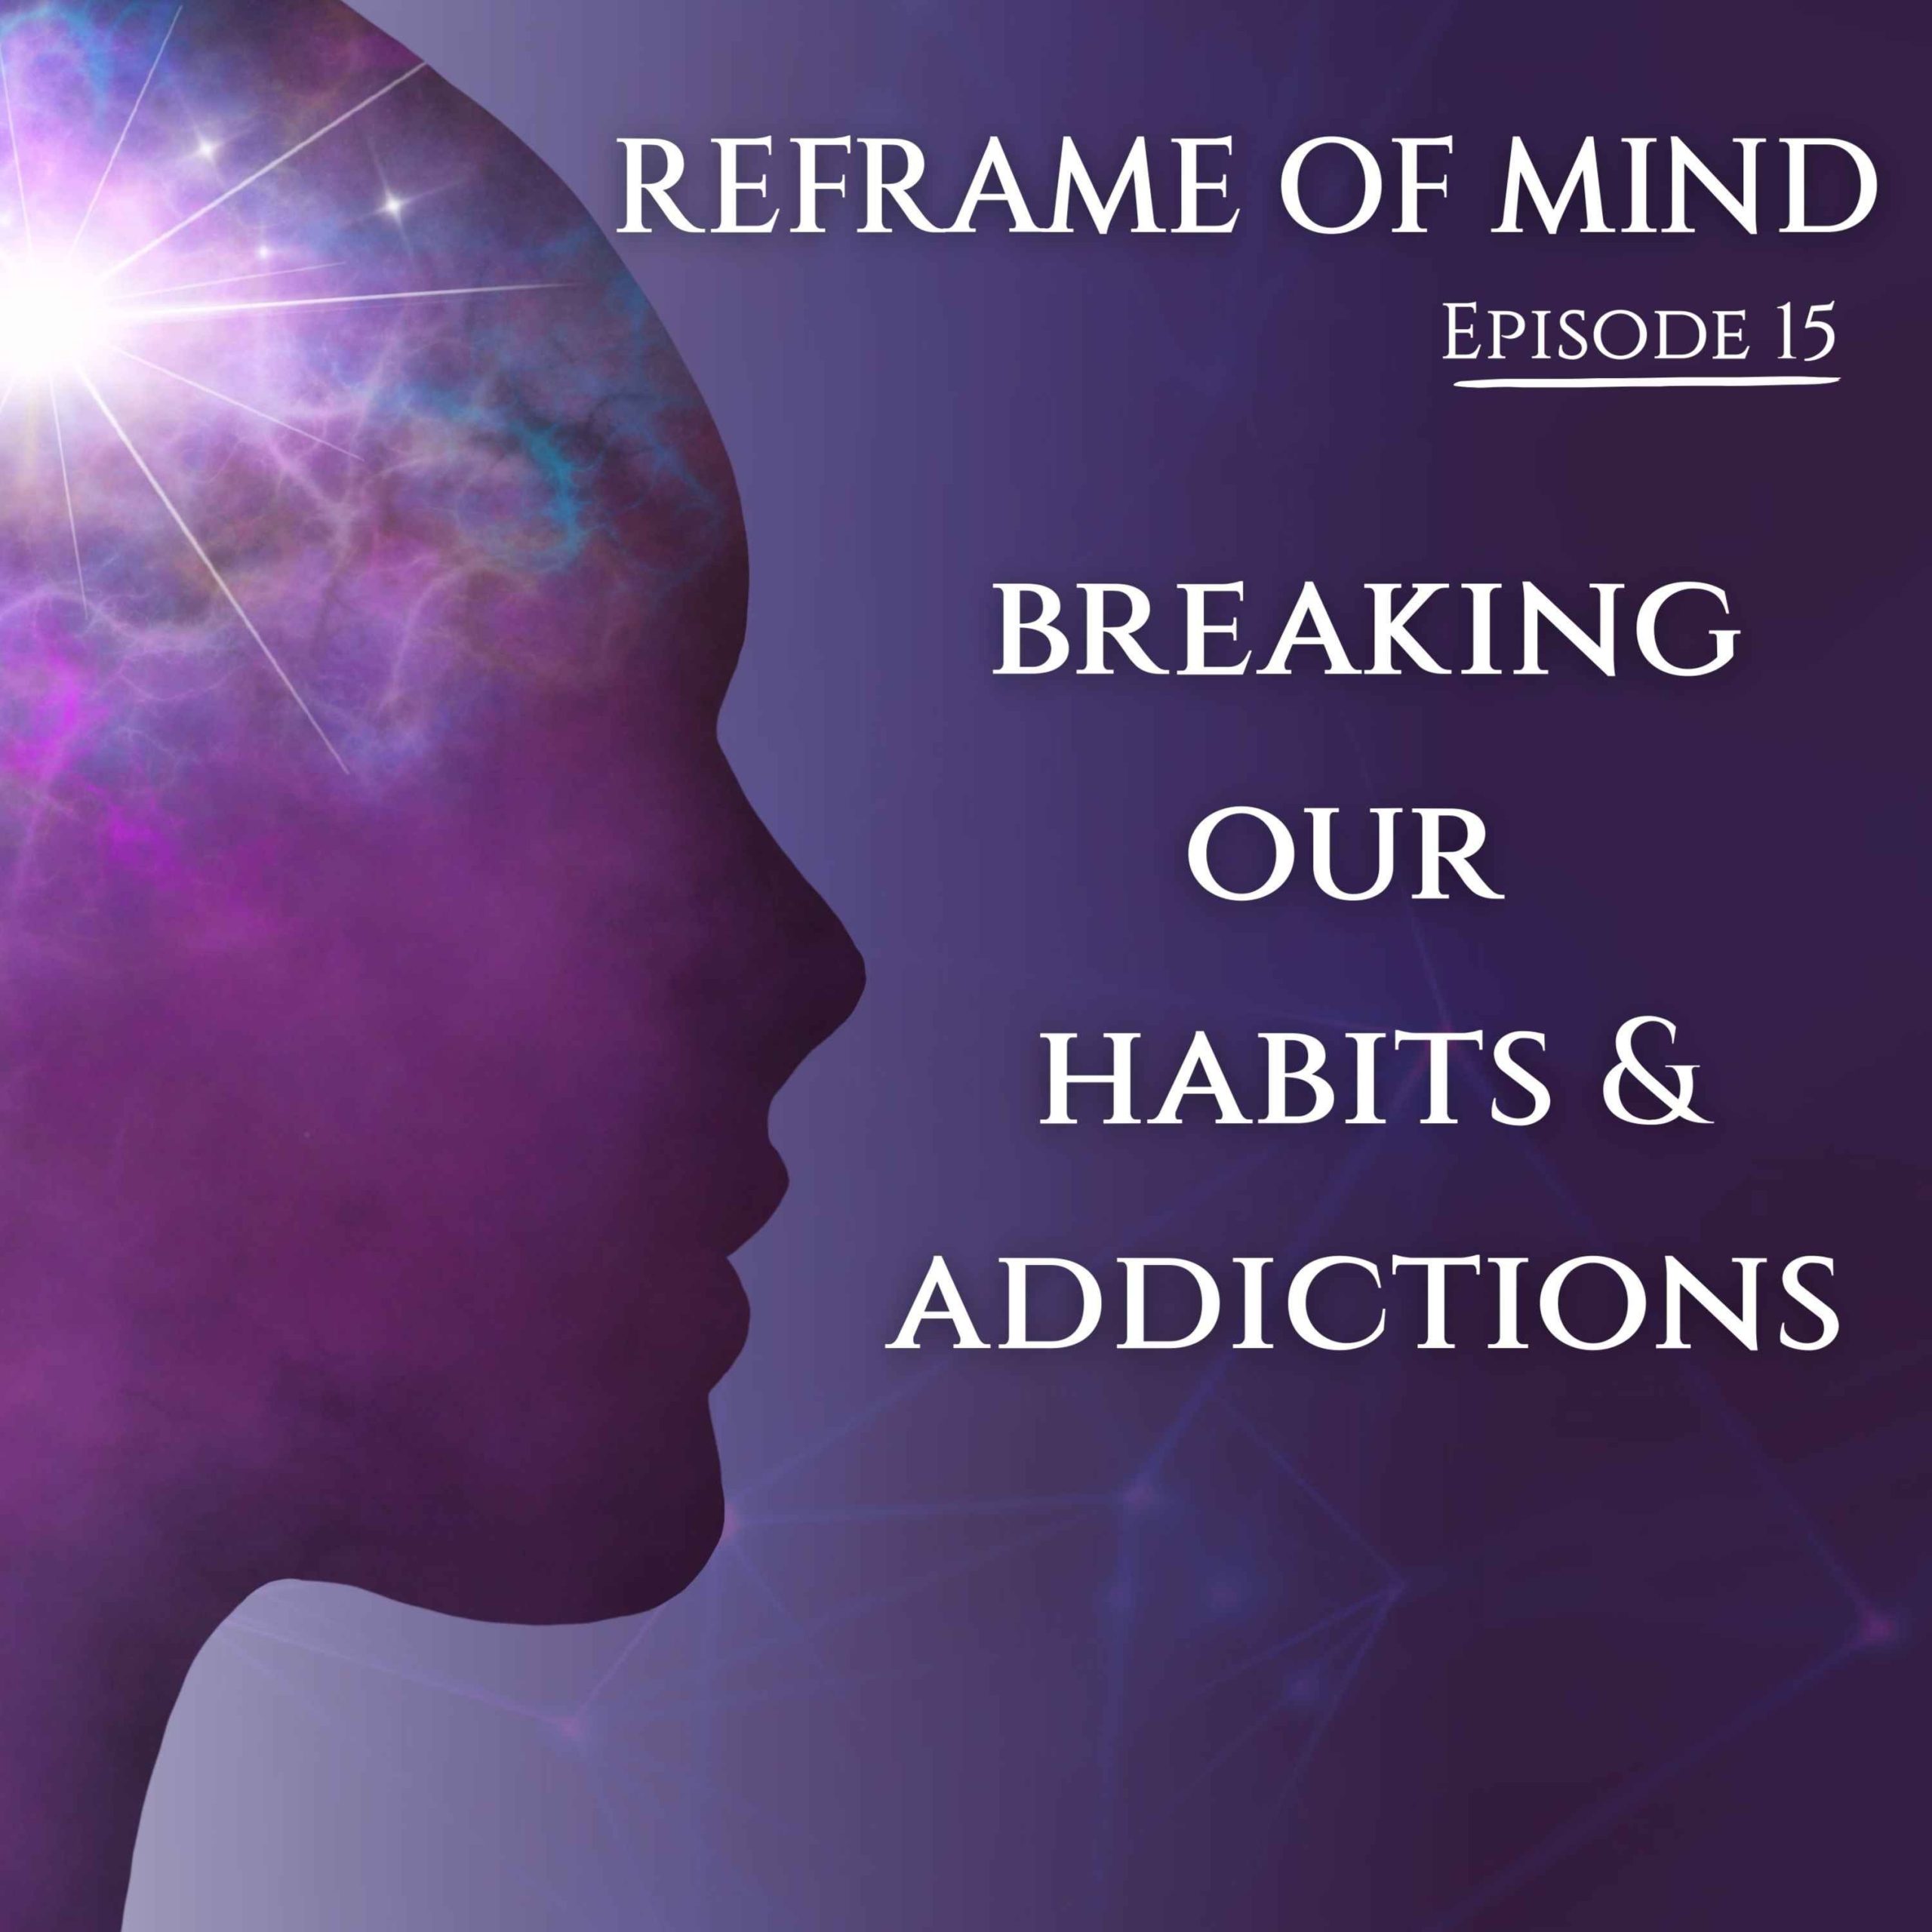 Breaking our habits and addictions